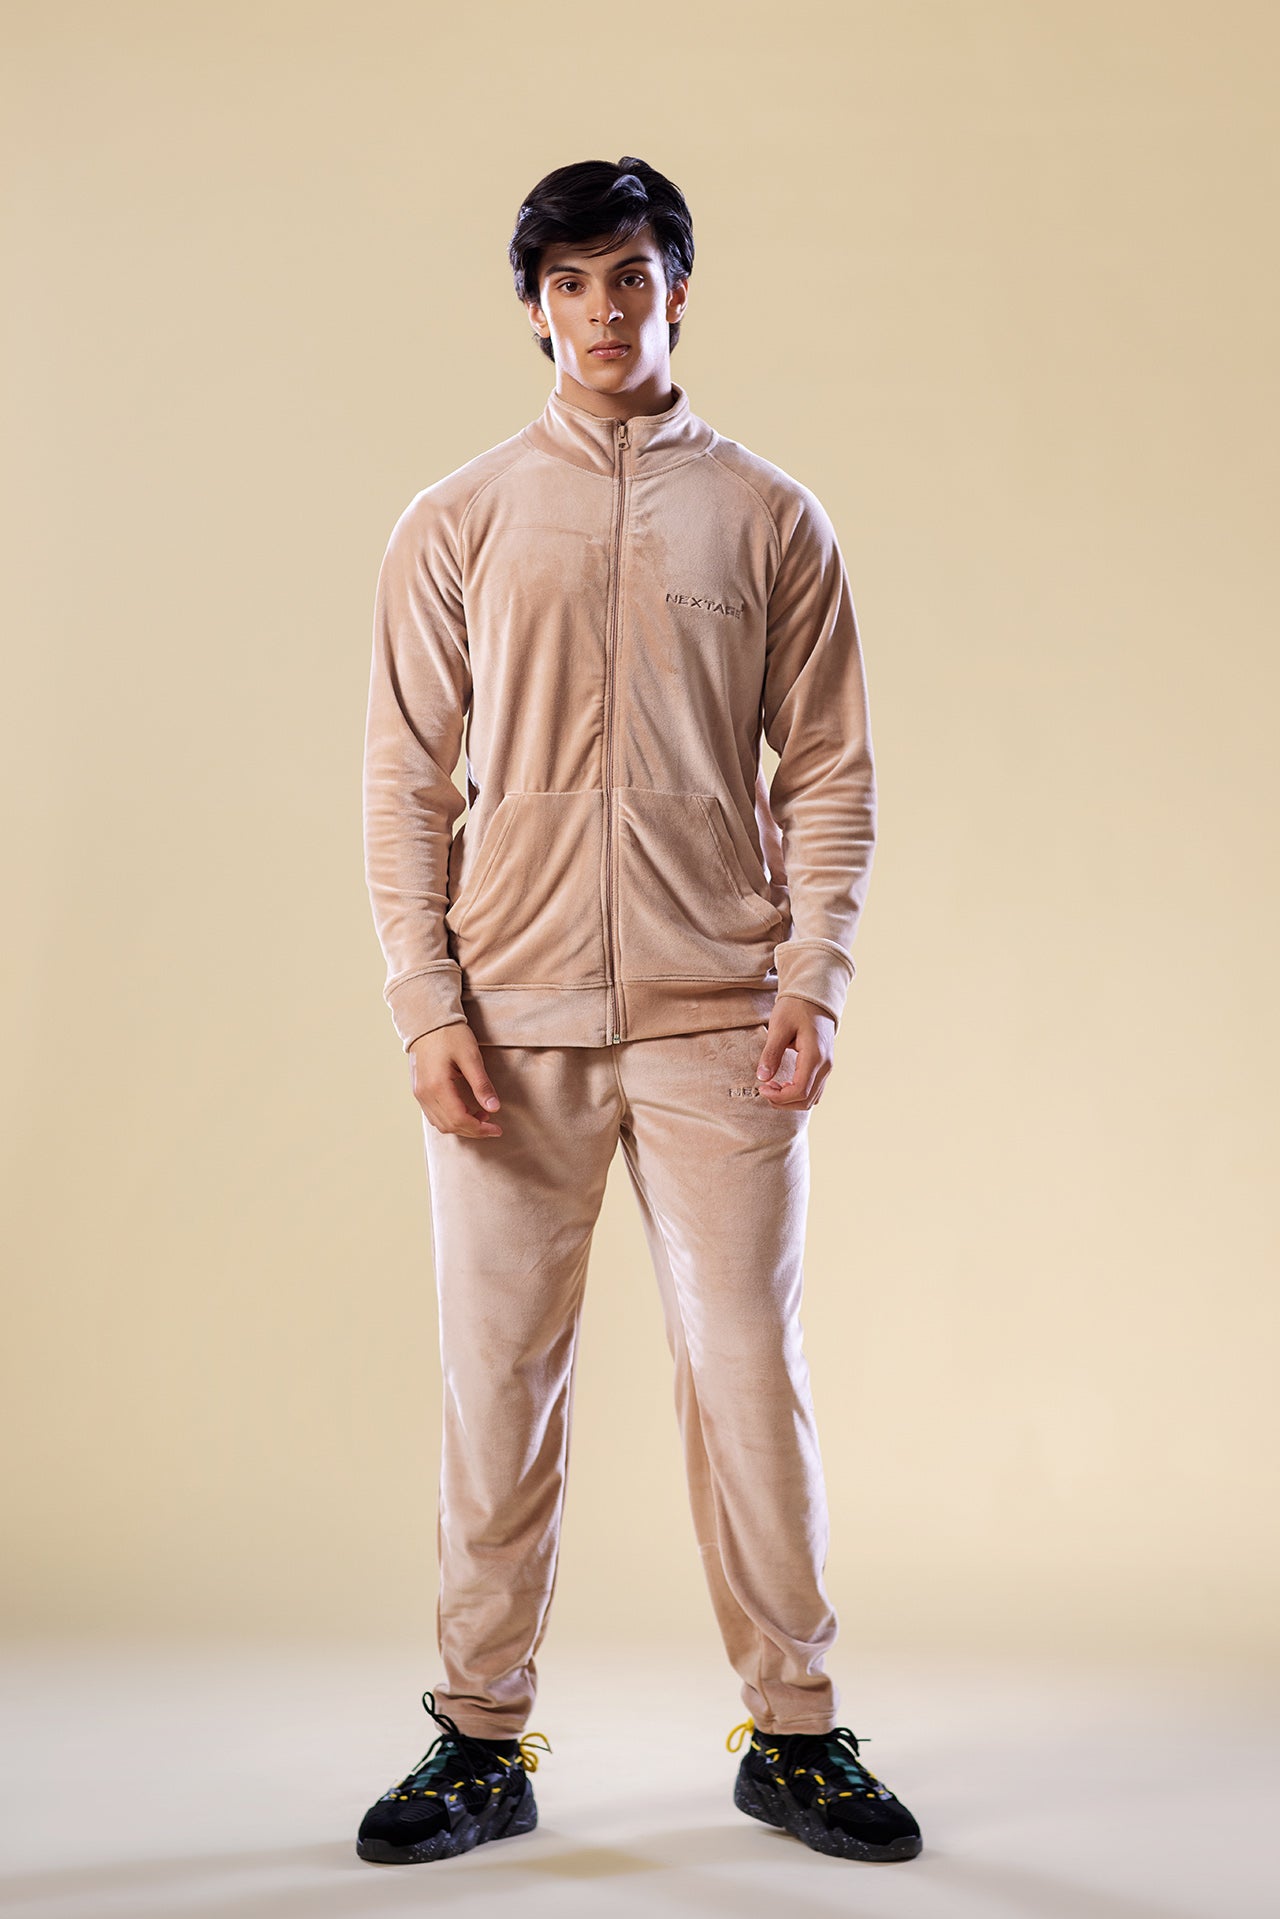 beige tracksuit for winter, winter track suit collection,